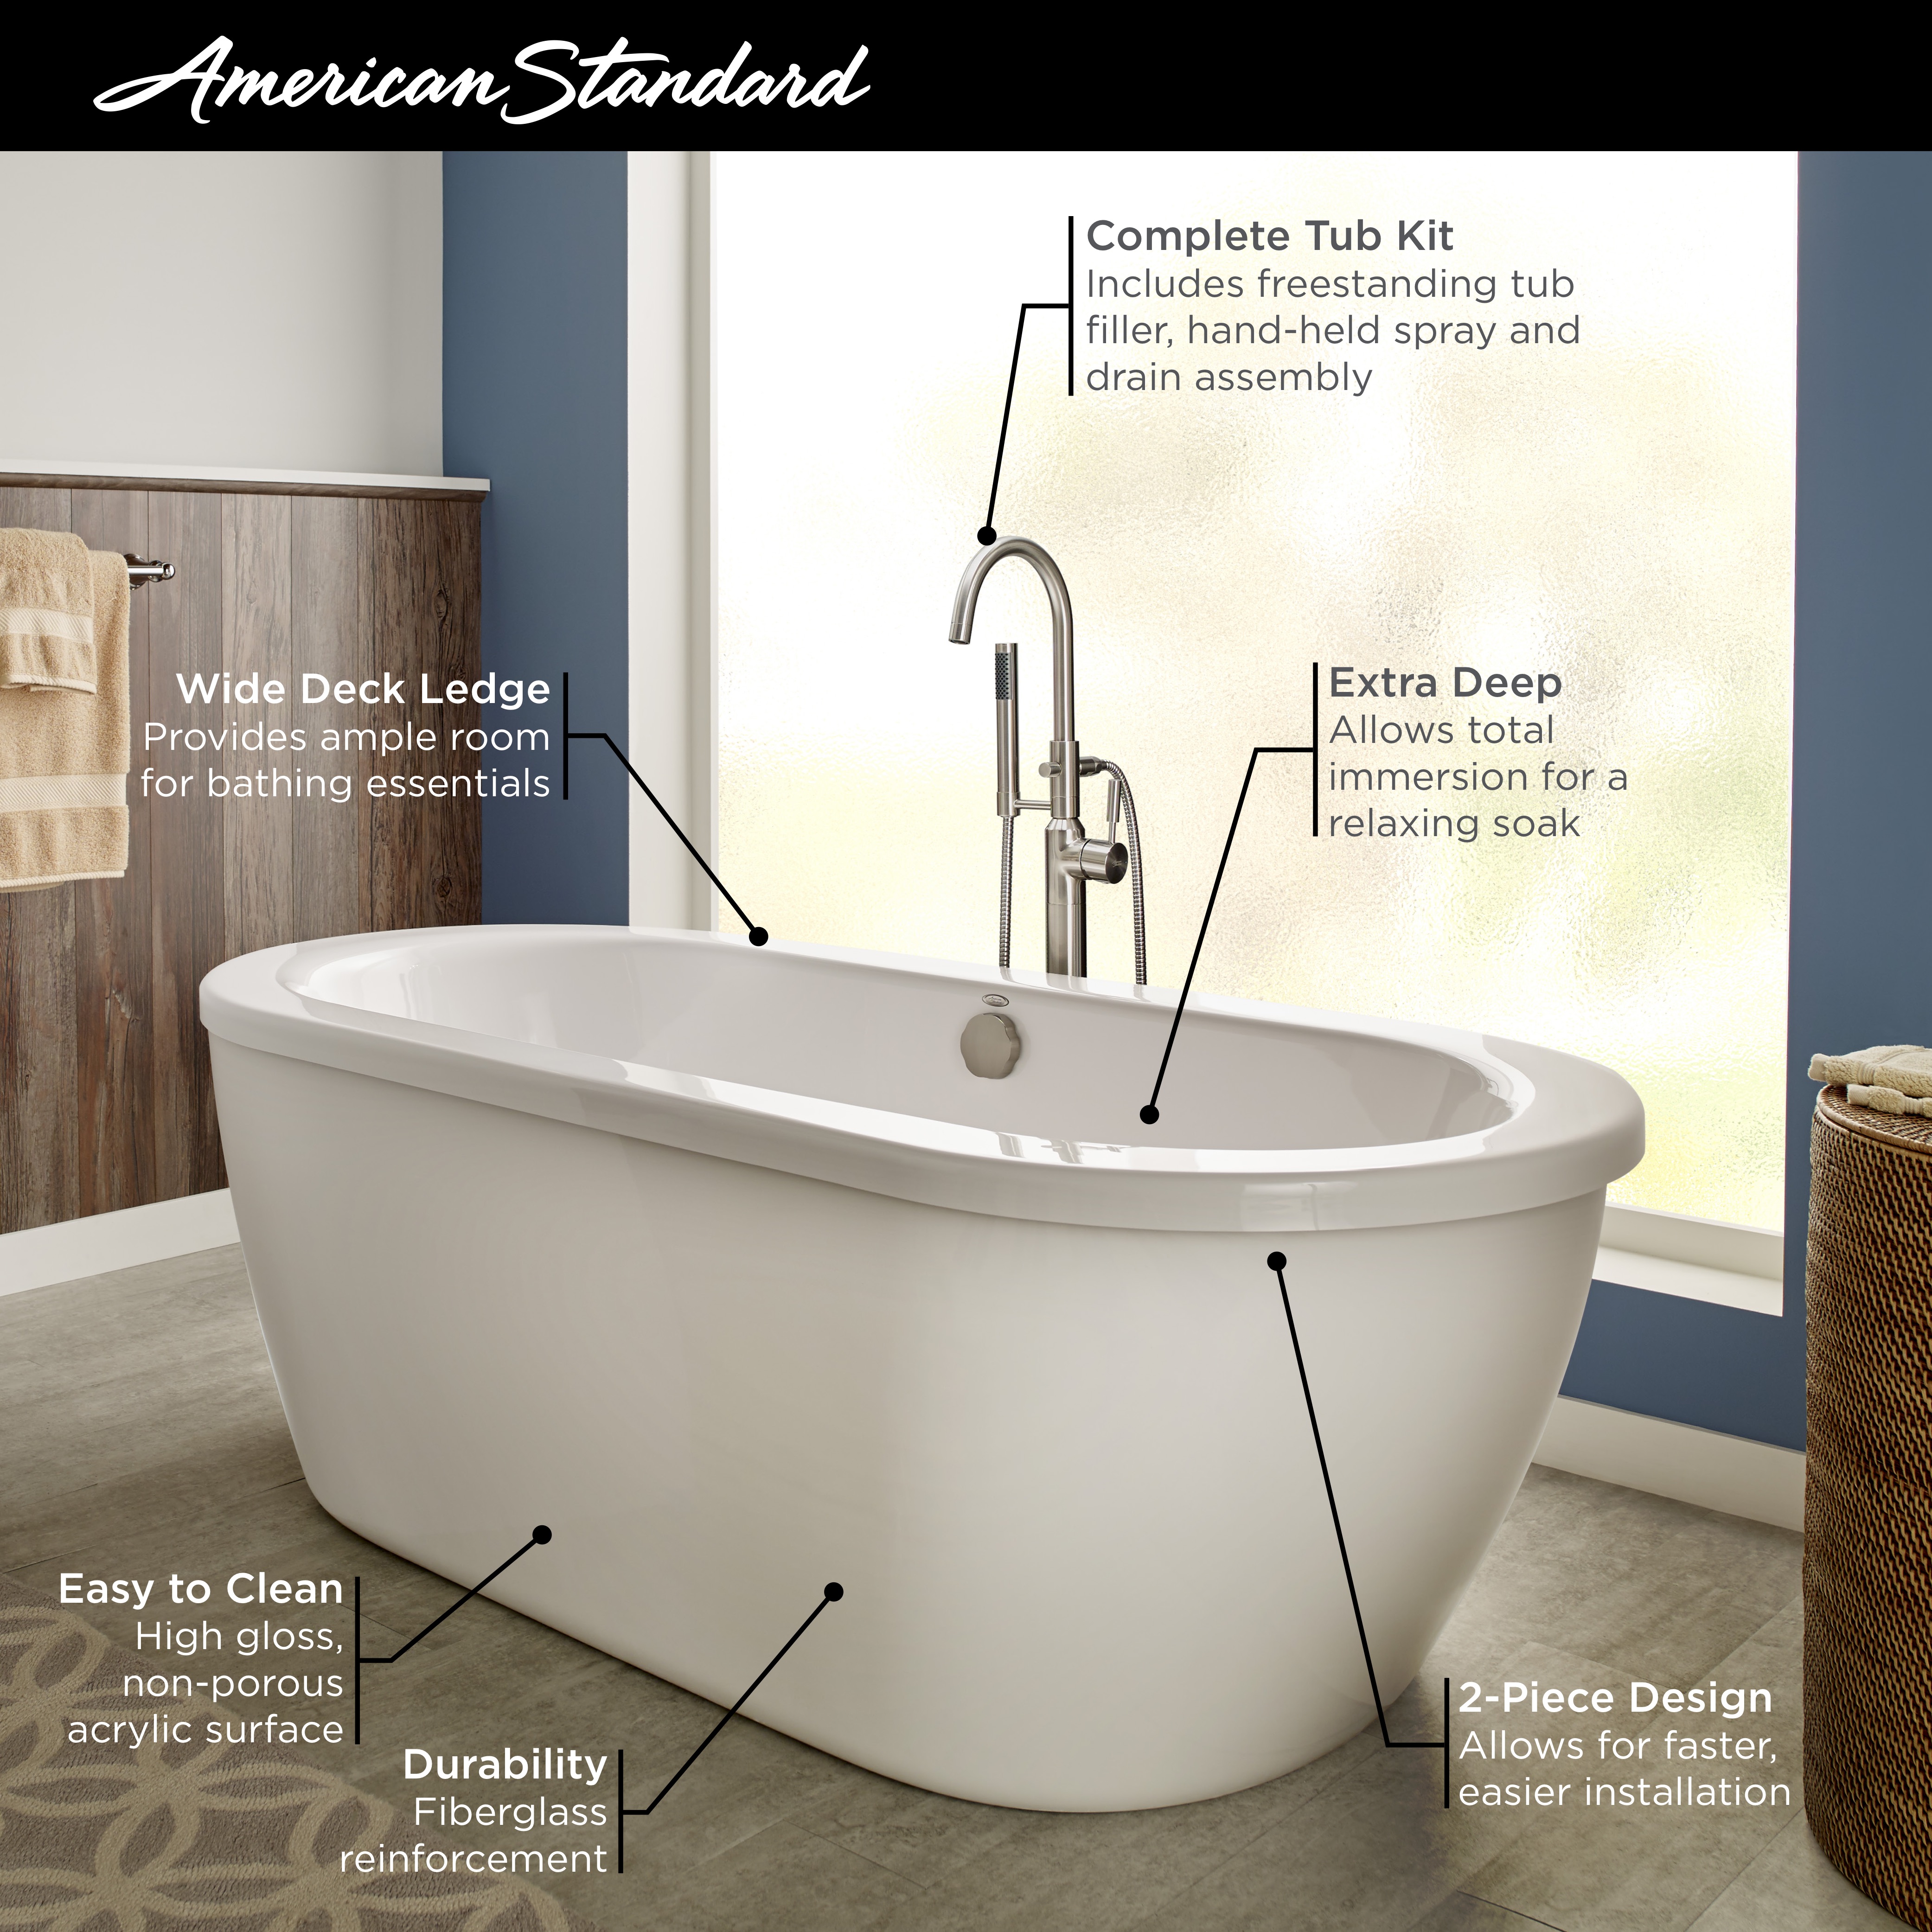 Cadet® 66 x 32-Inch Freestanding Bathtub With Polished Chrome Finish Filler and Drain Kit